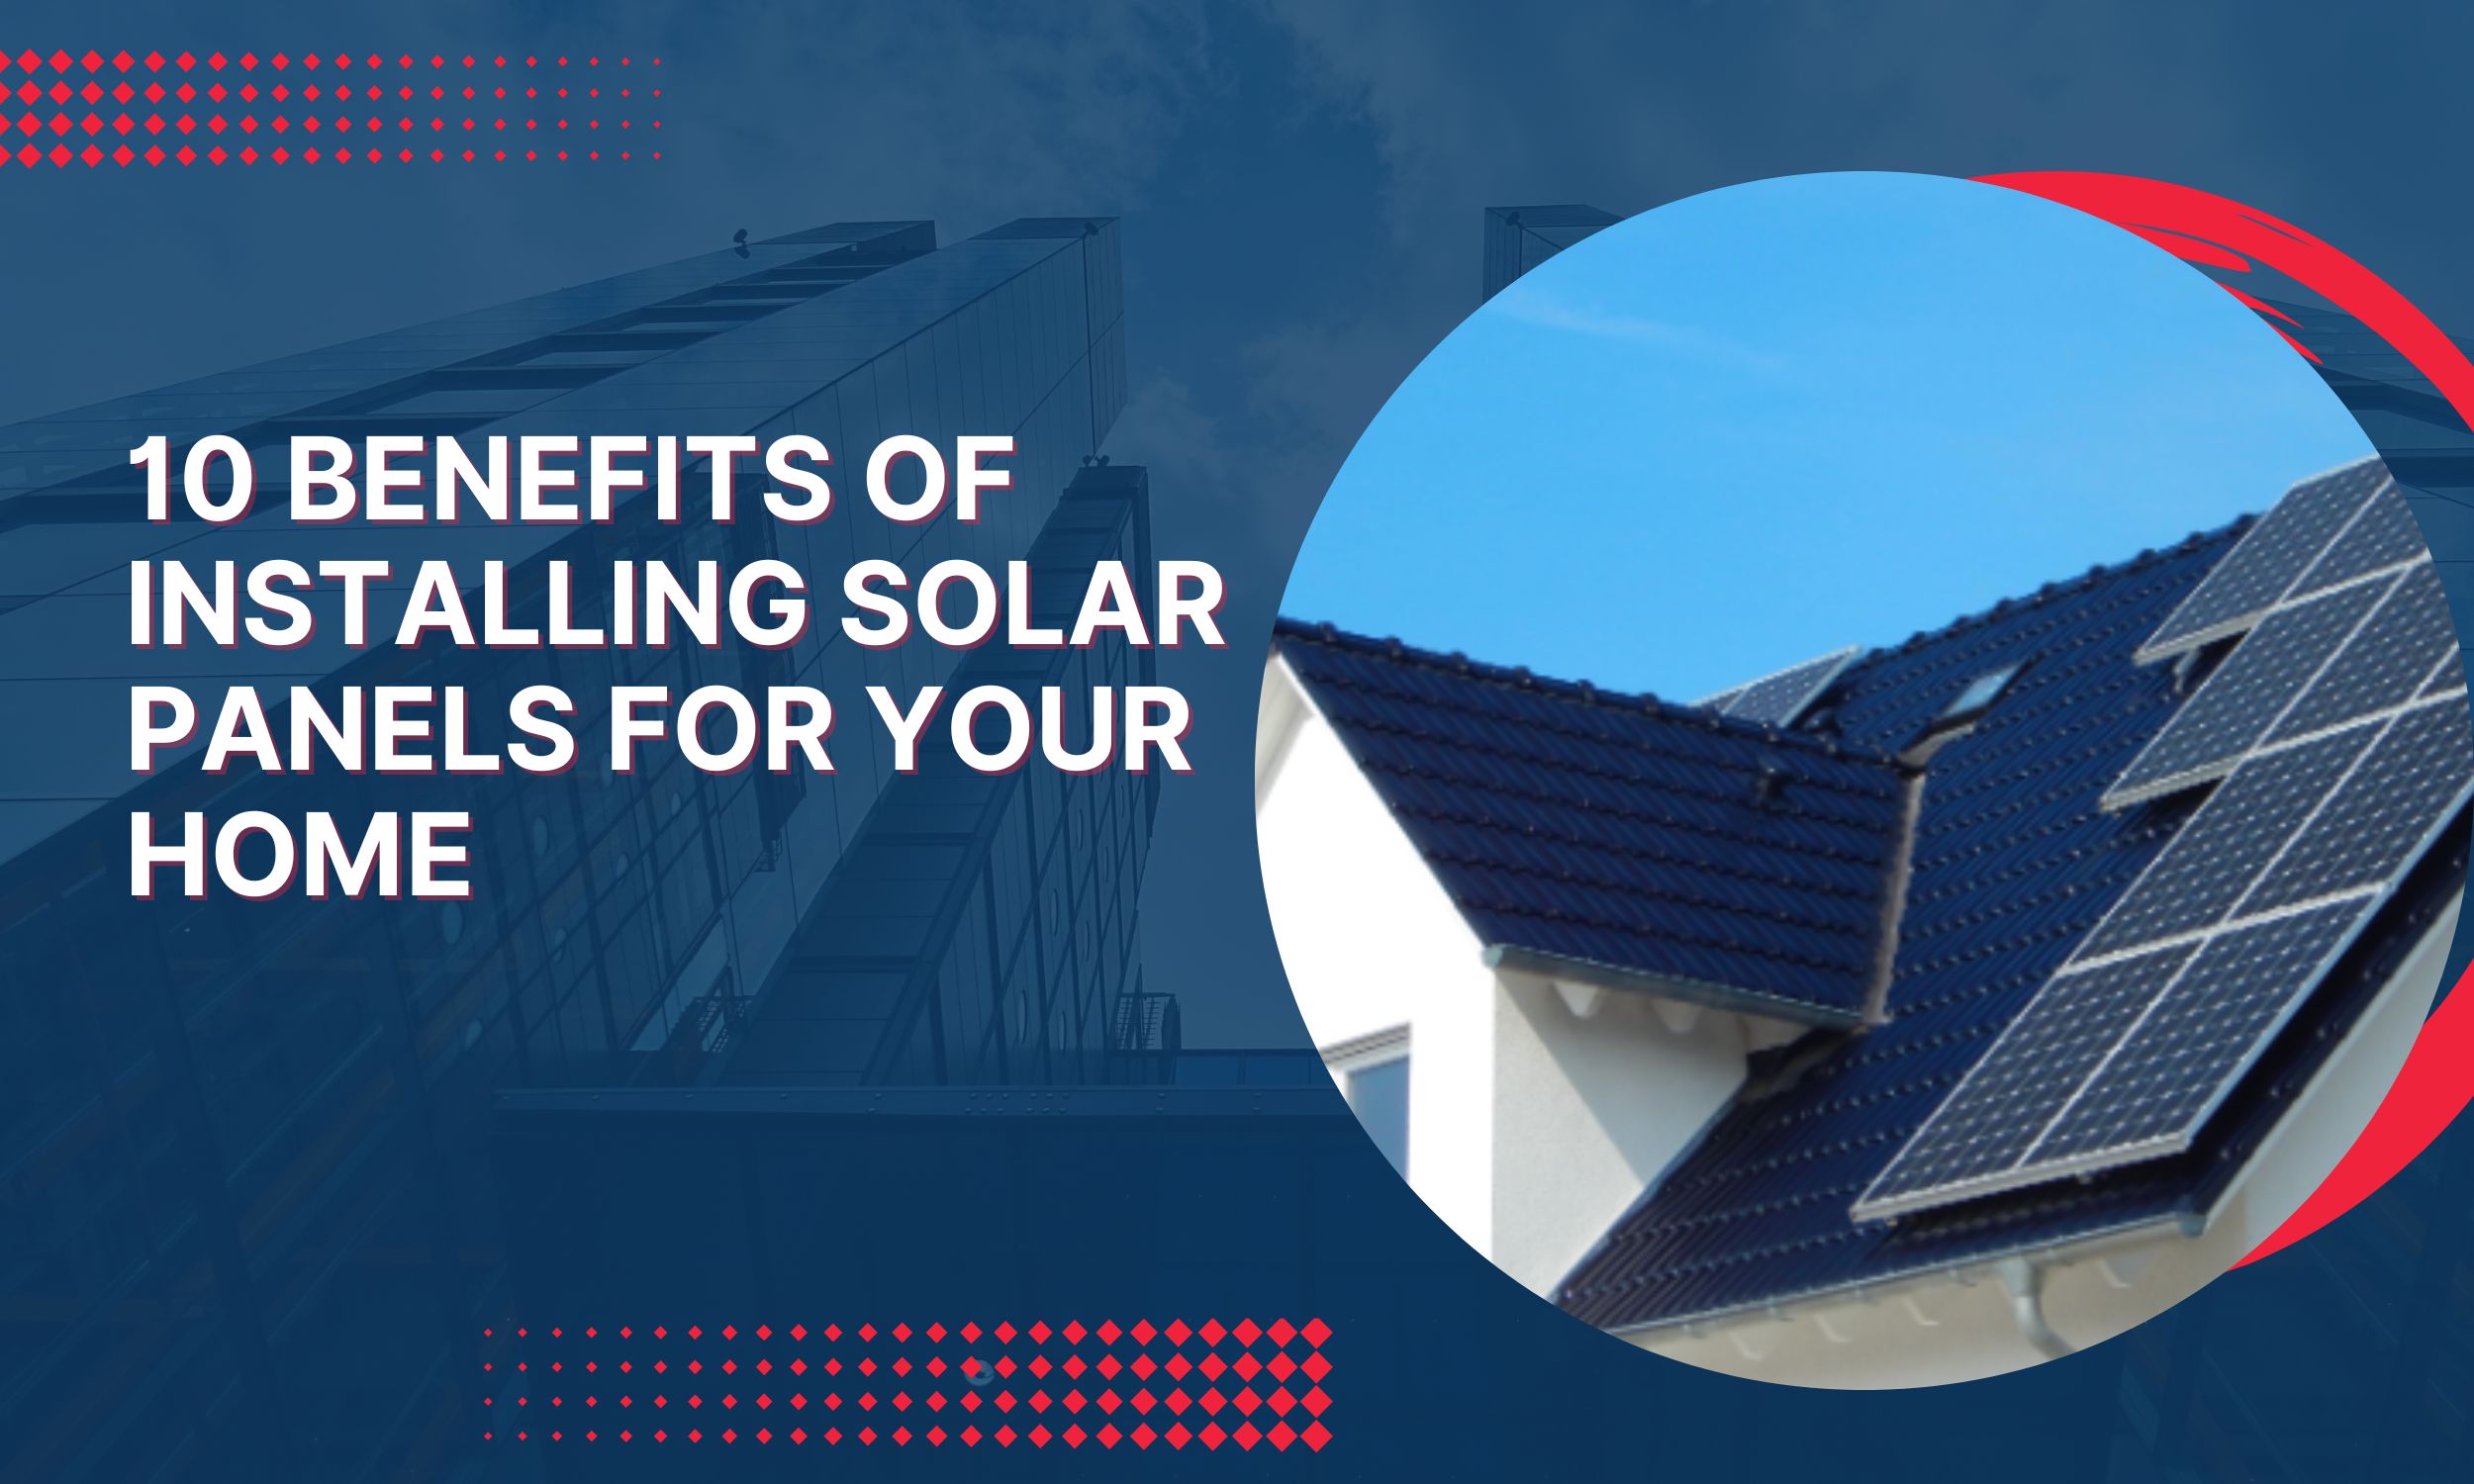 10 Benefits of Installing Solar Panels for Your Home